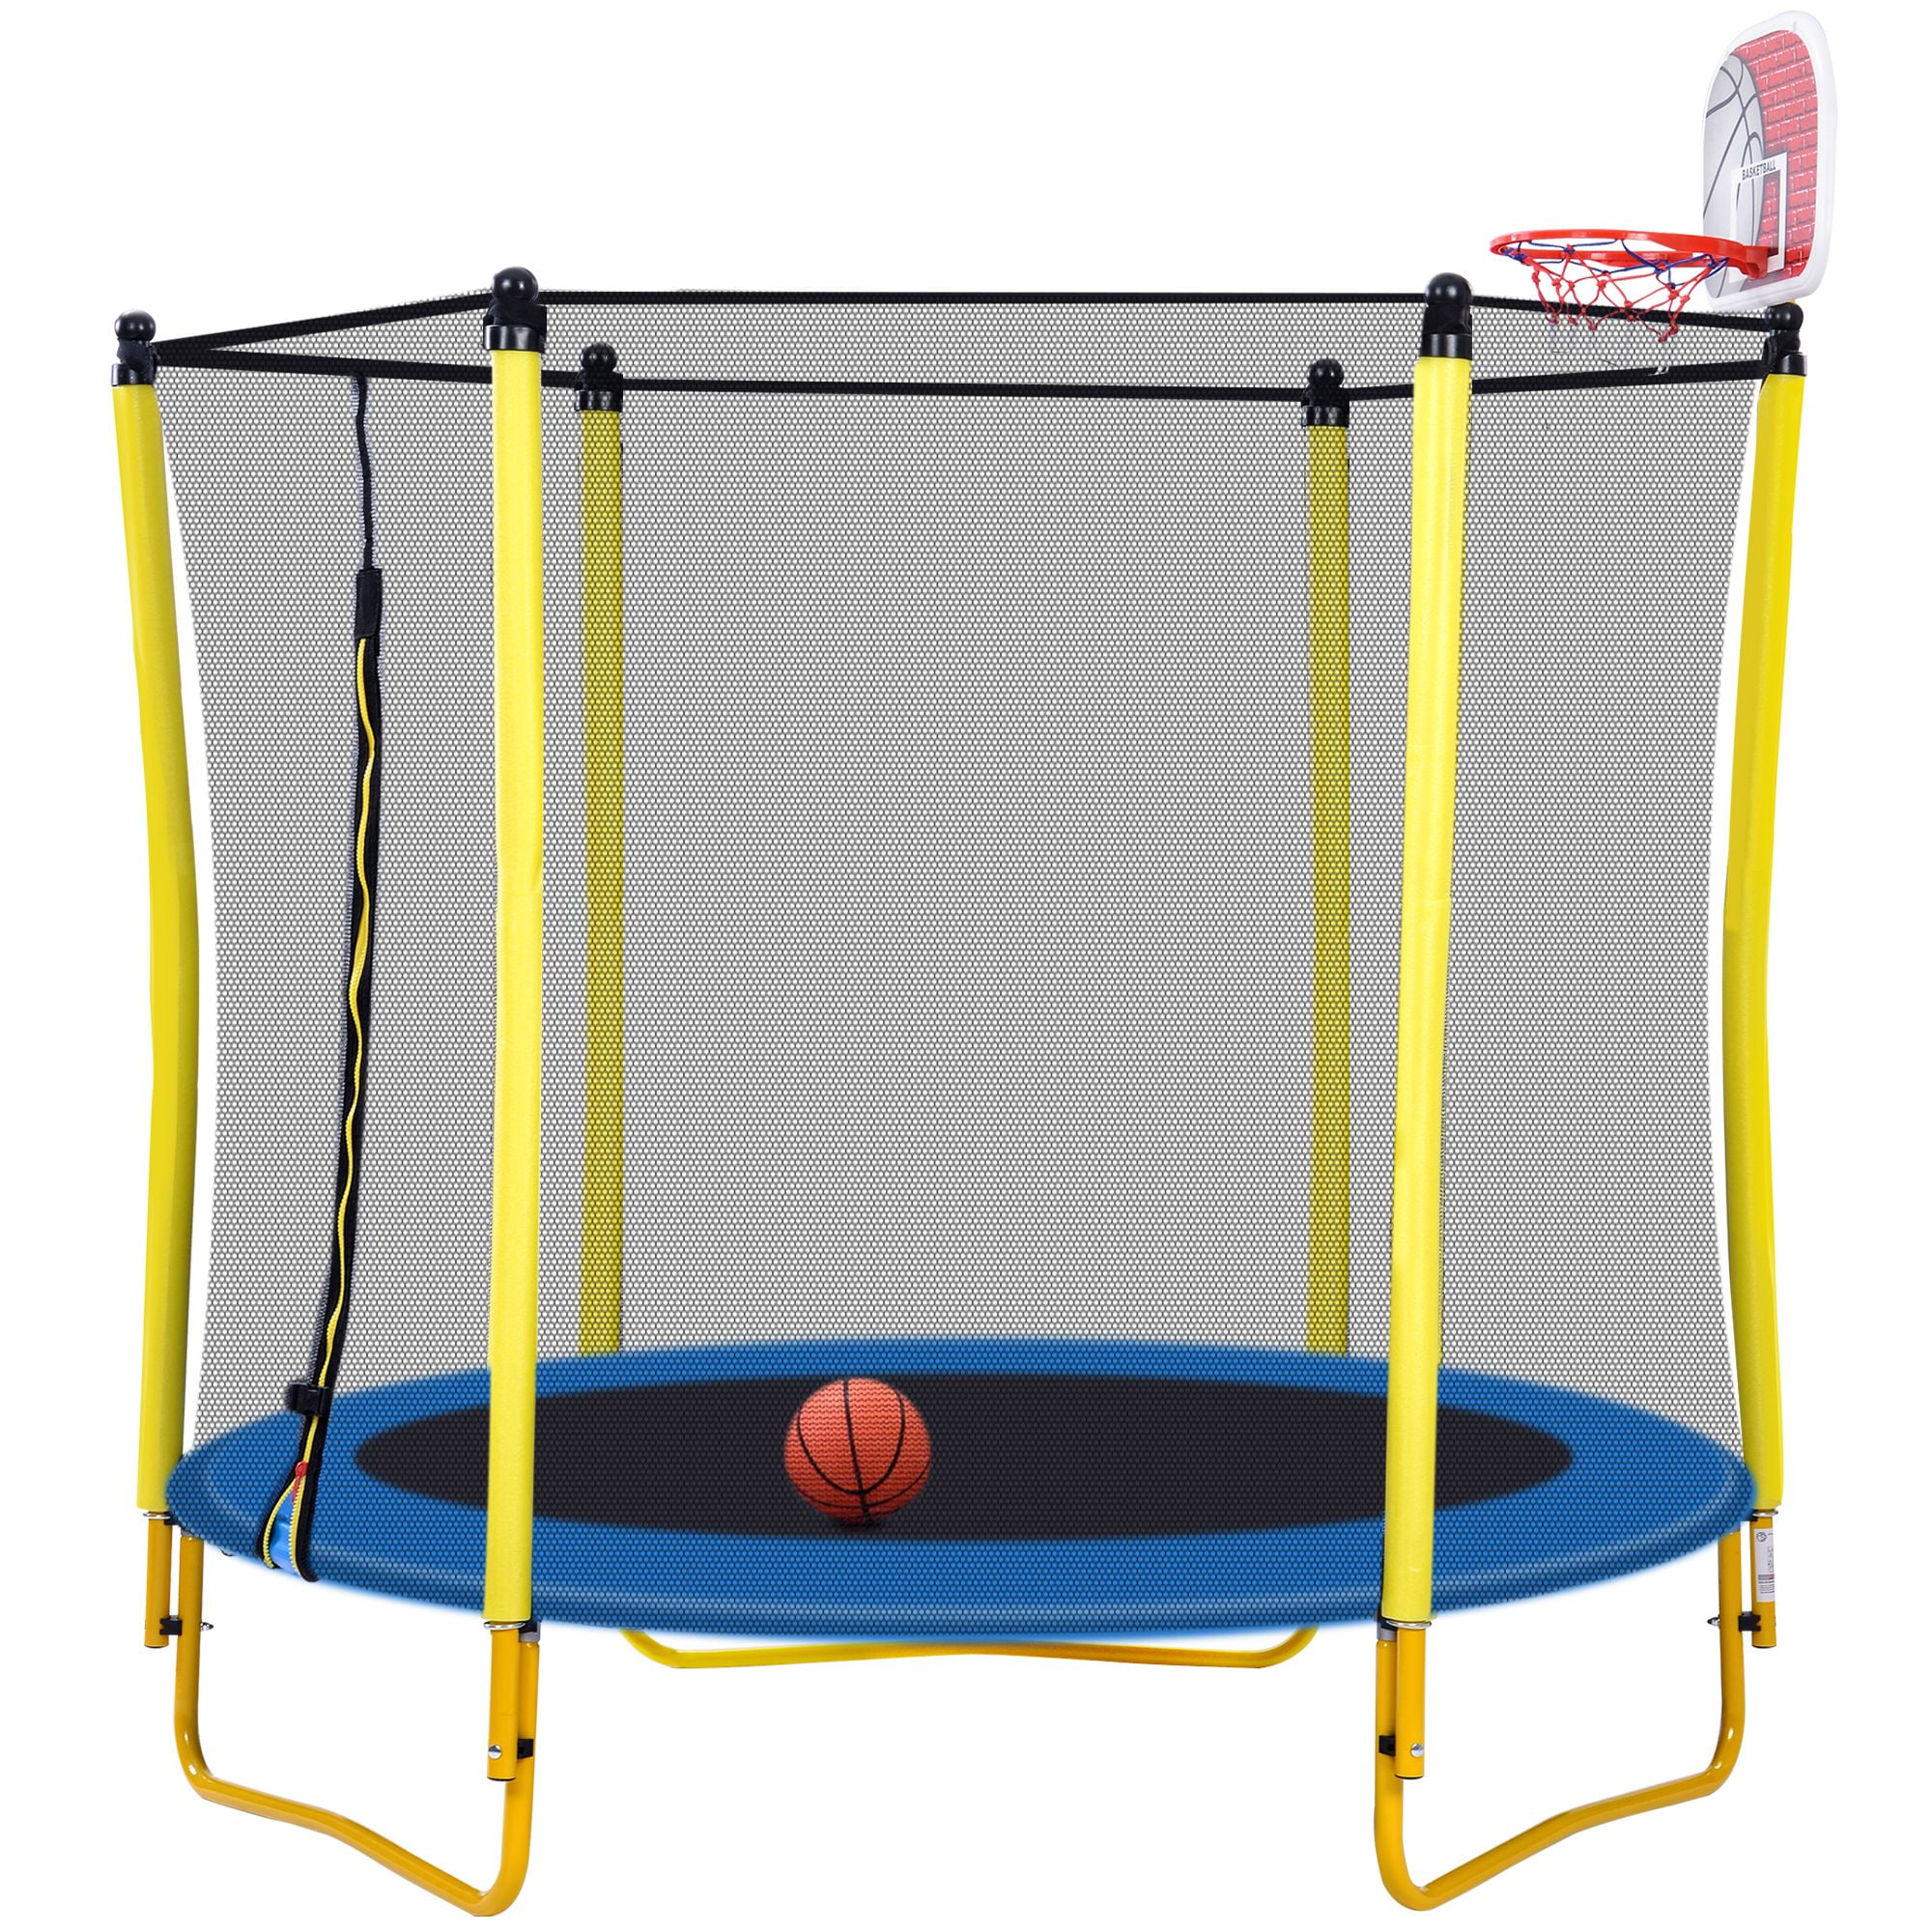 Andoer 5.5FT Trampoline for Kids - 65" Outdoor & Indoor Mini Toddler Trampoline with Enclosure, Basketball Hoop and Ball Included